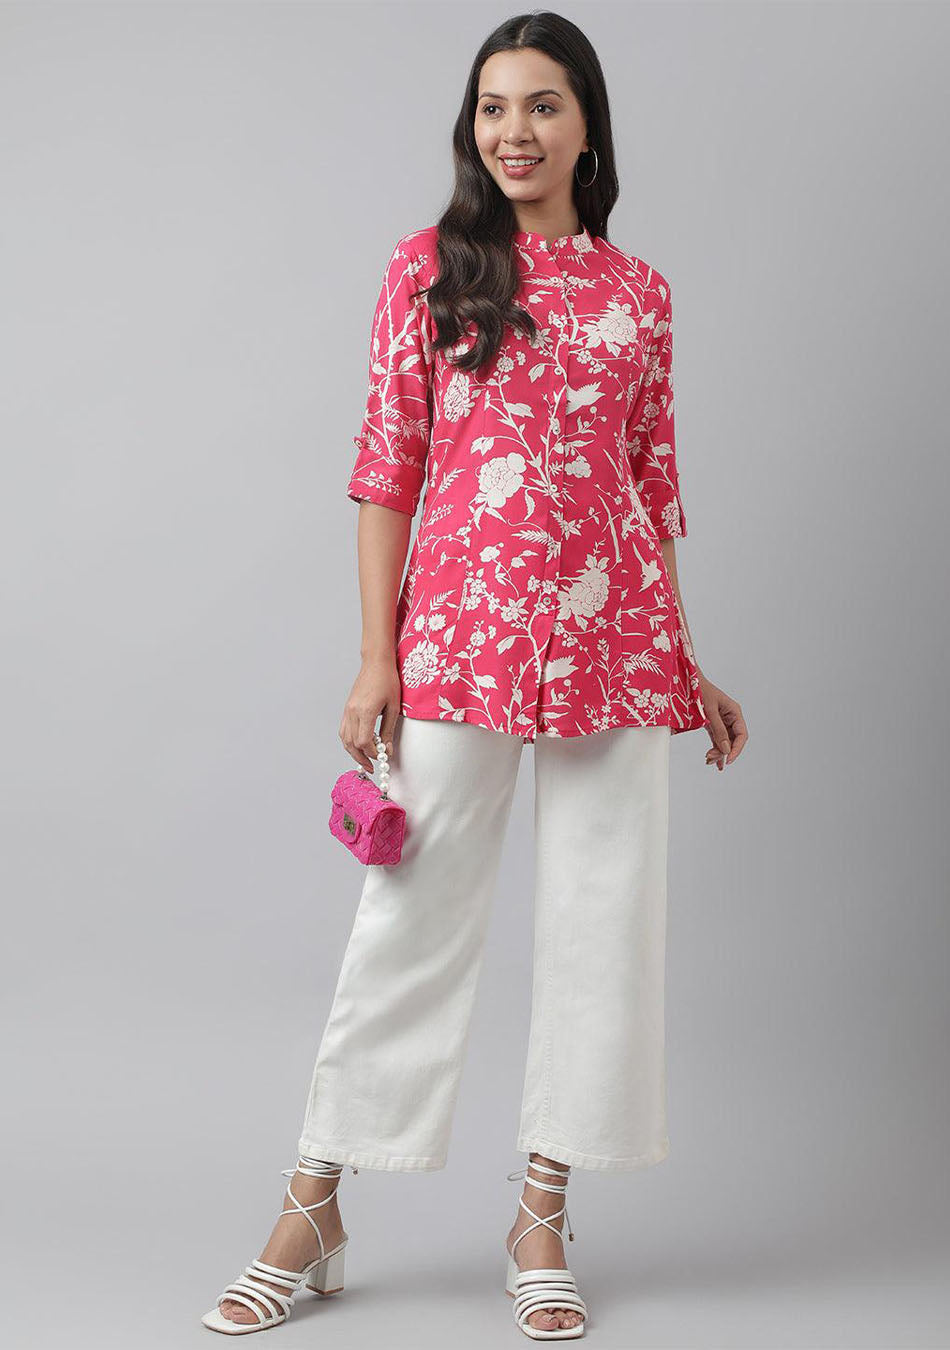 Hot Pink Floral Printed Rayon A-line Shirt Style Top